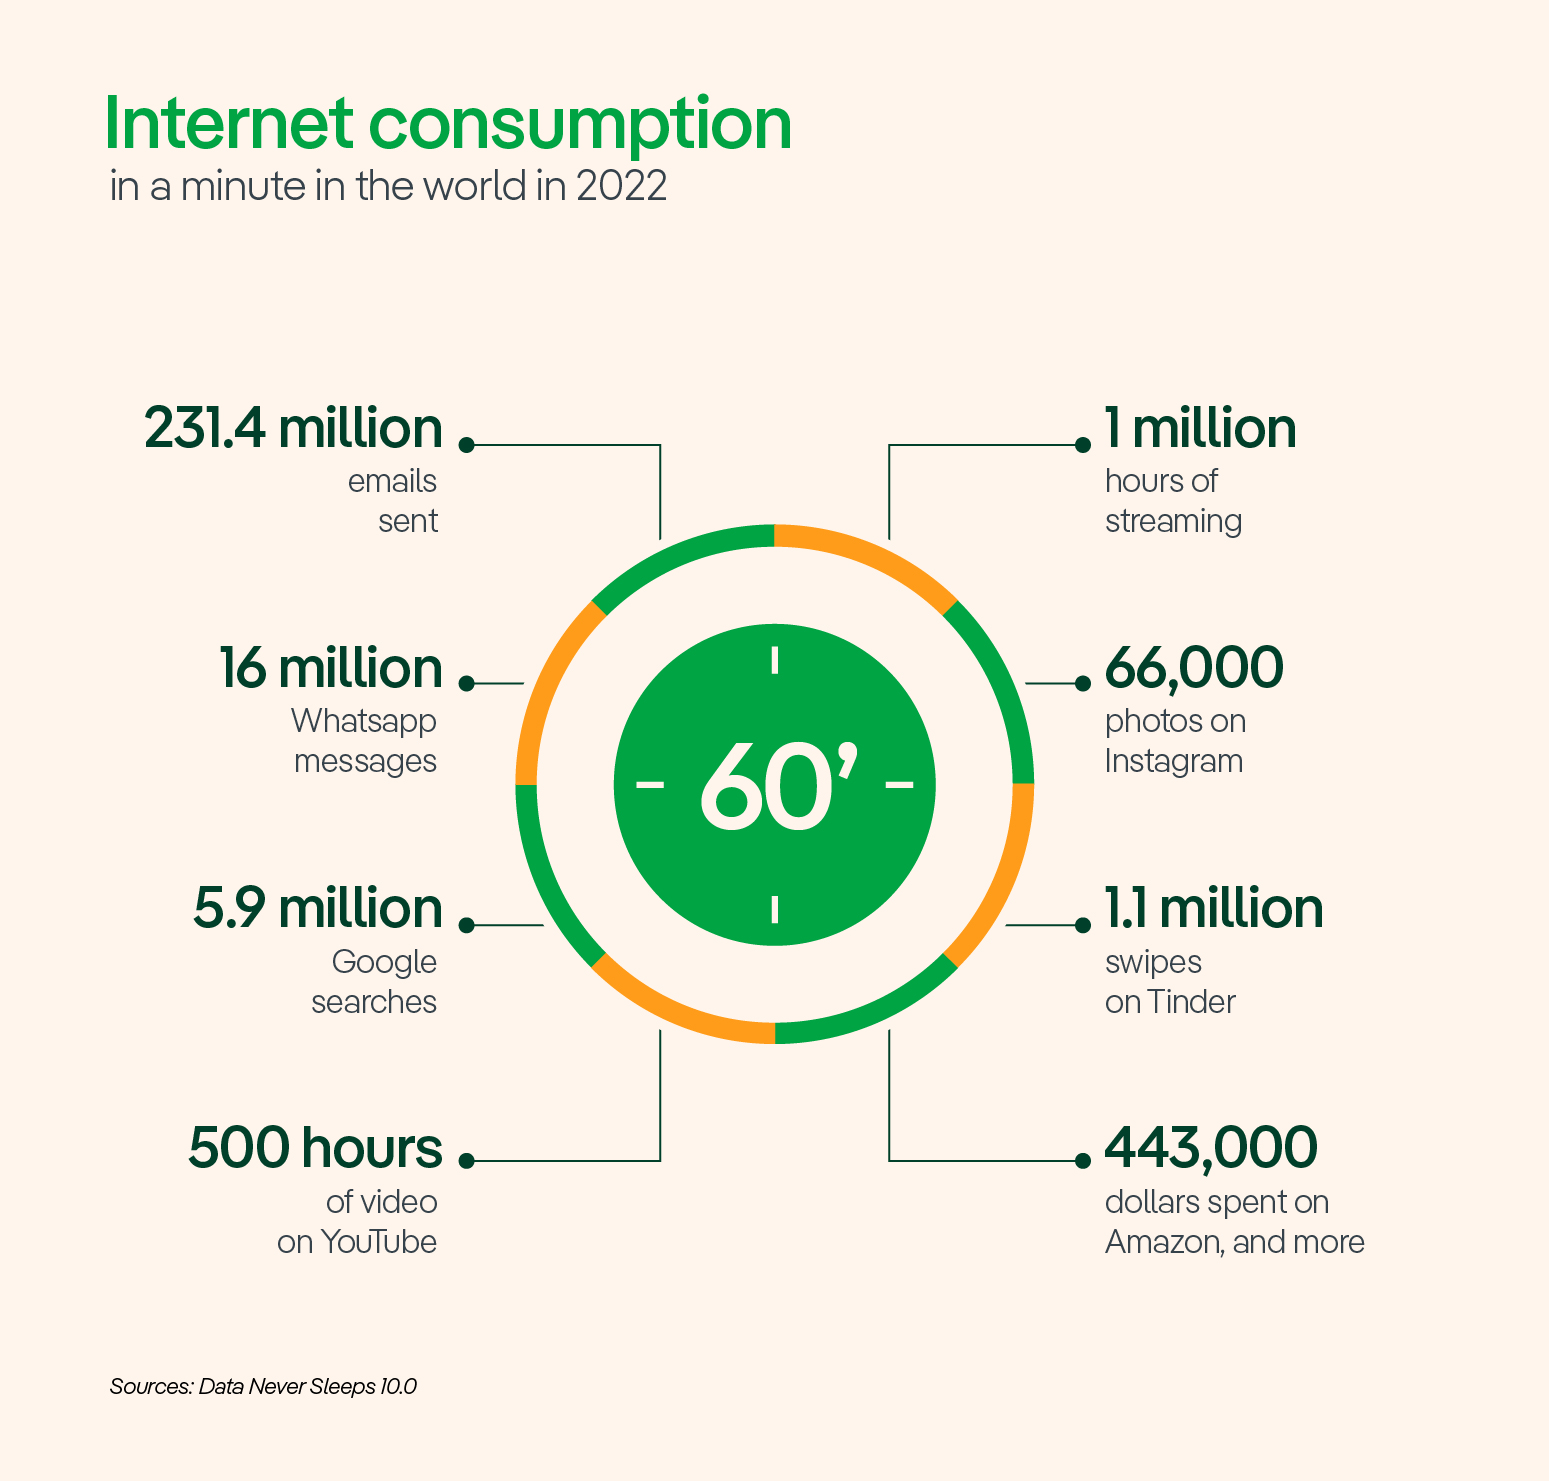 Internet consumption in one minute in the world